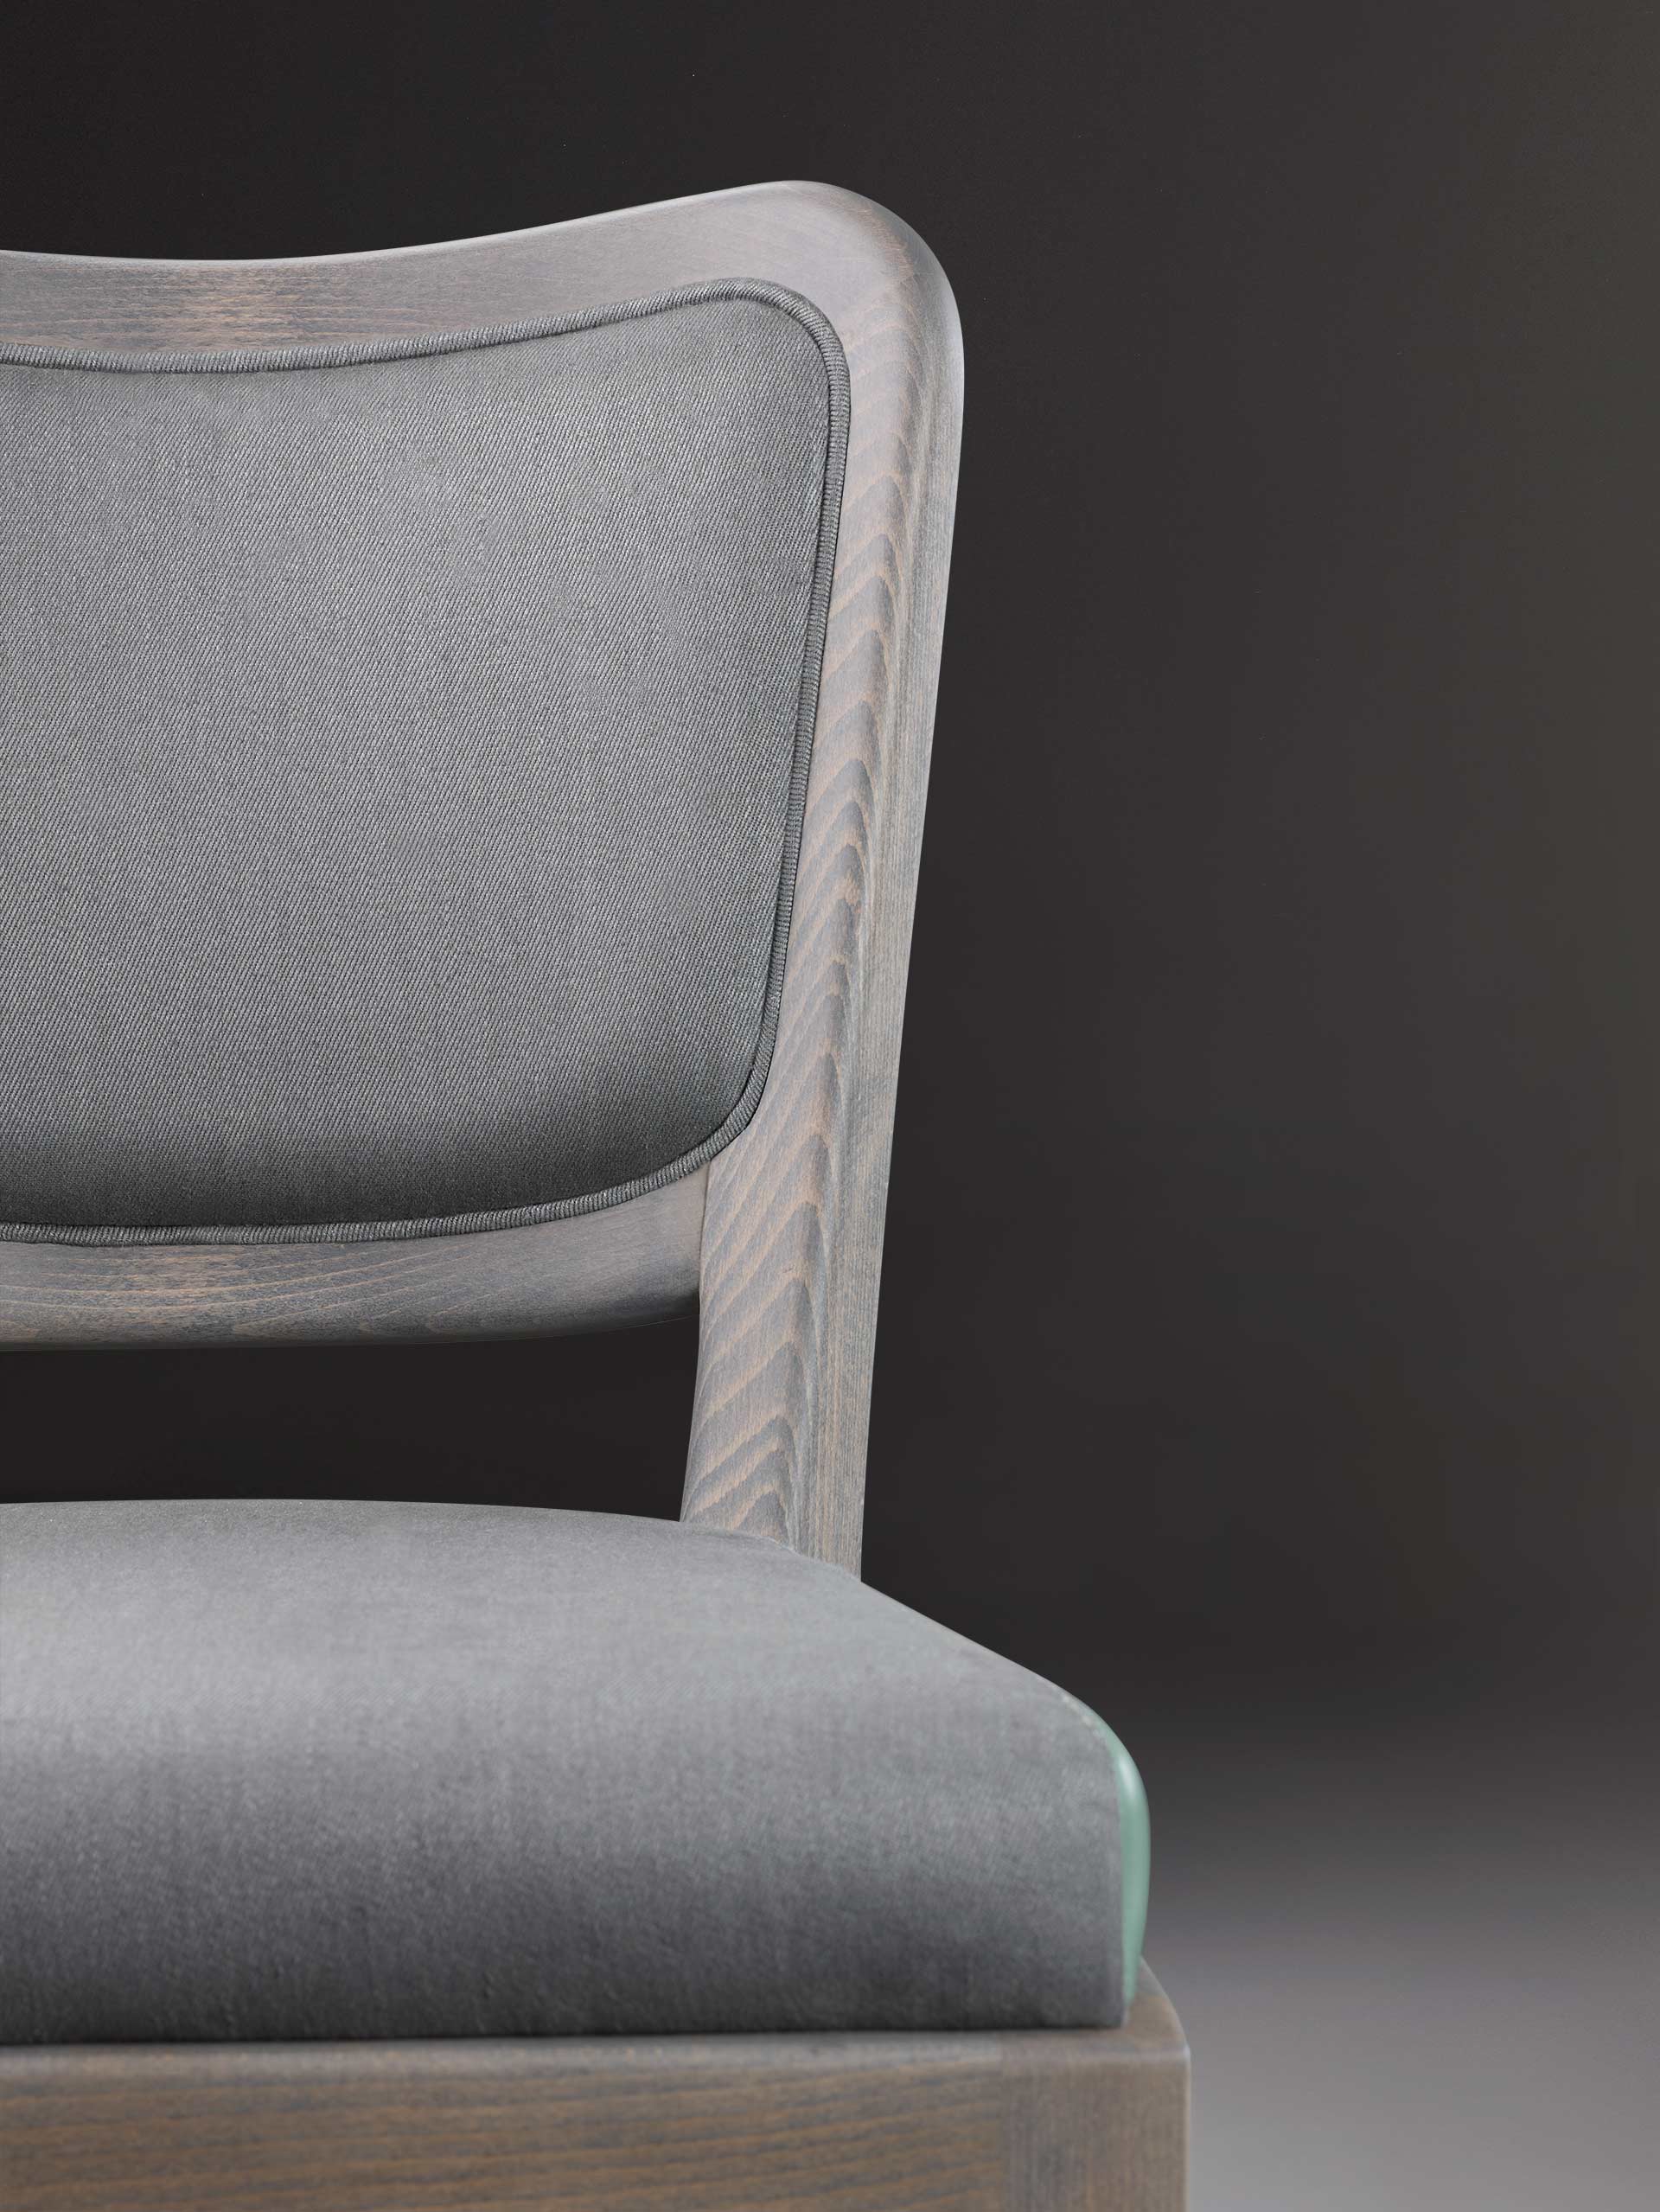 Detail of Pepita, a wooden dining chair with fabric or leather seat, from Promemoria's catalogue | Promemoria